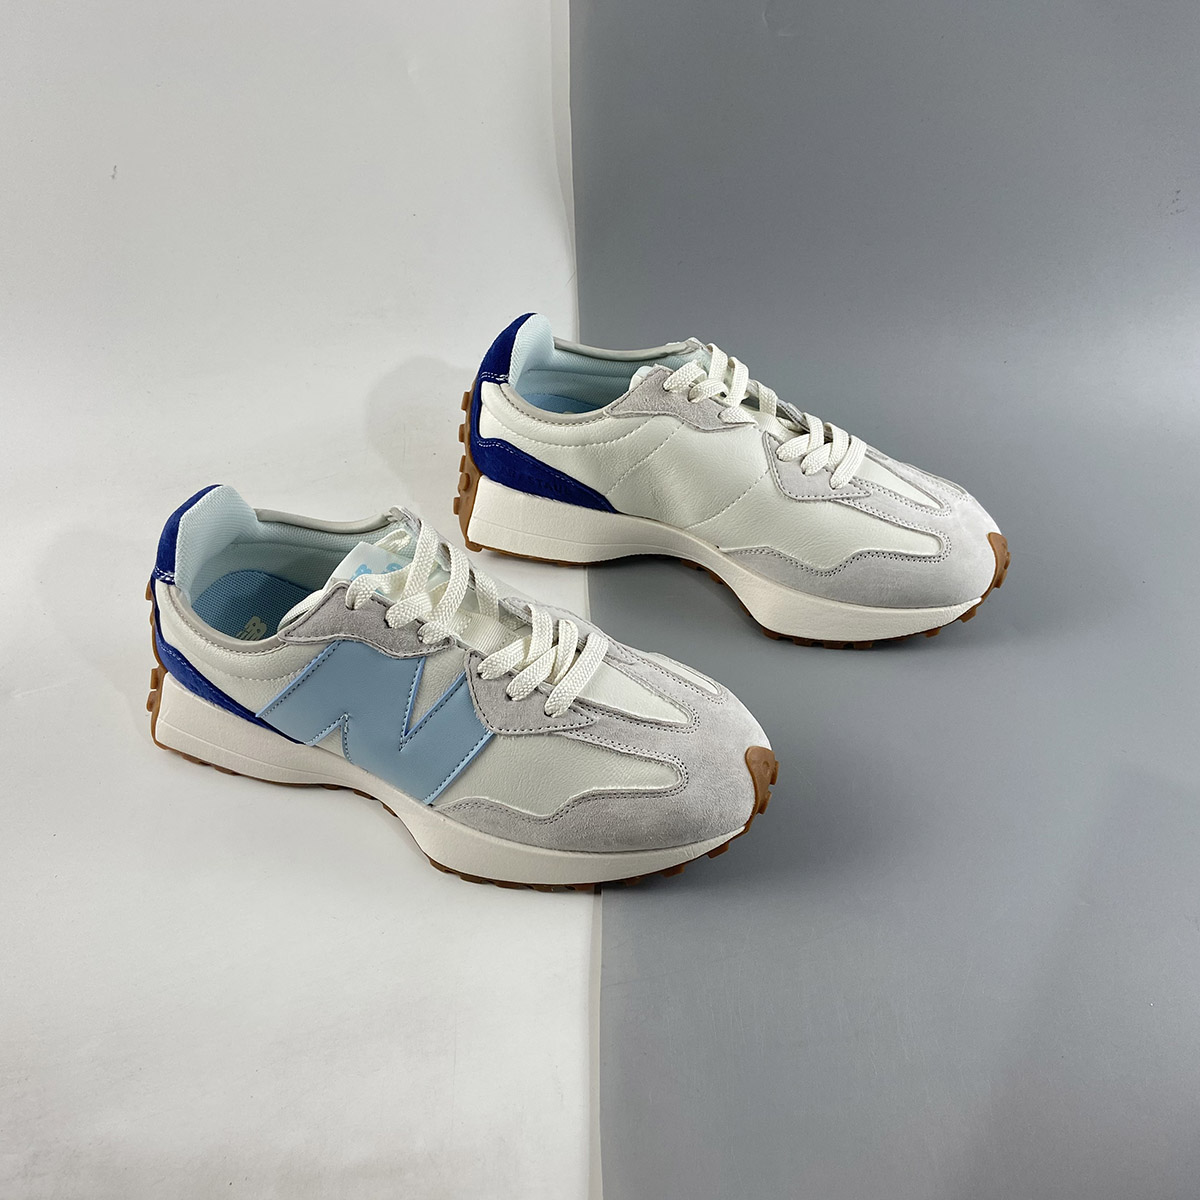 STAUD x New Balance 327 White Grey For Sale – The Sole Line